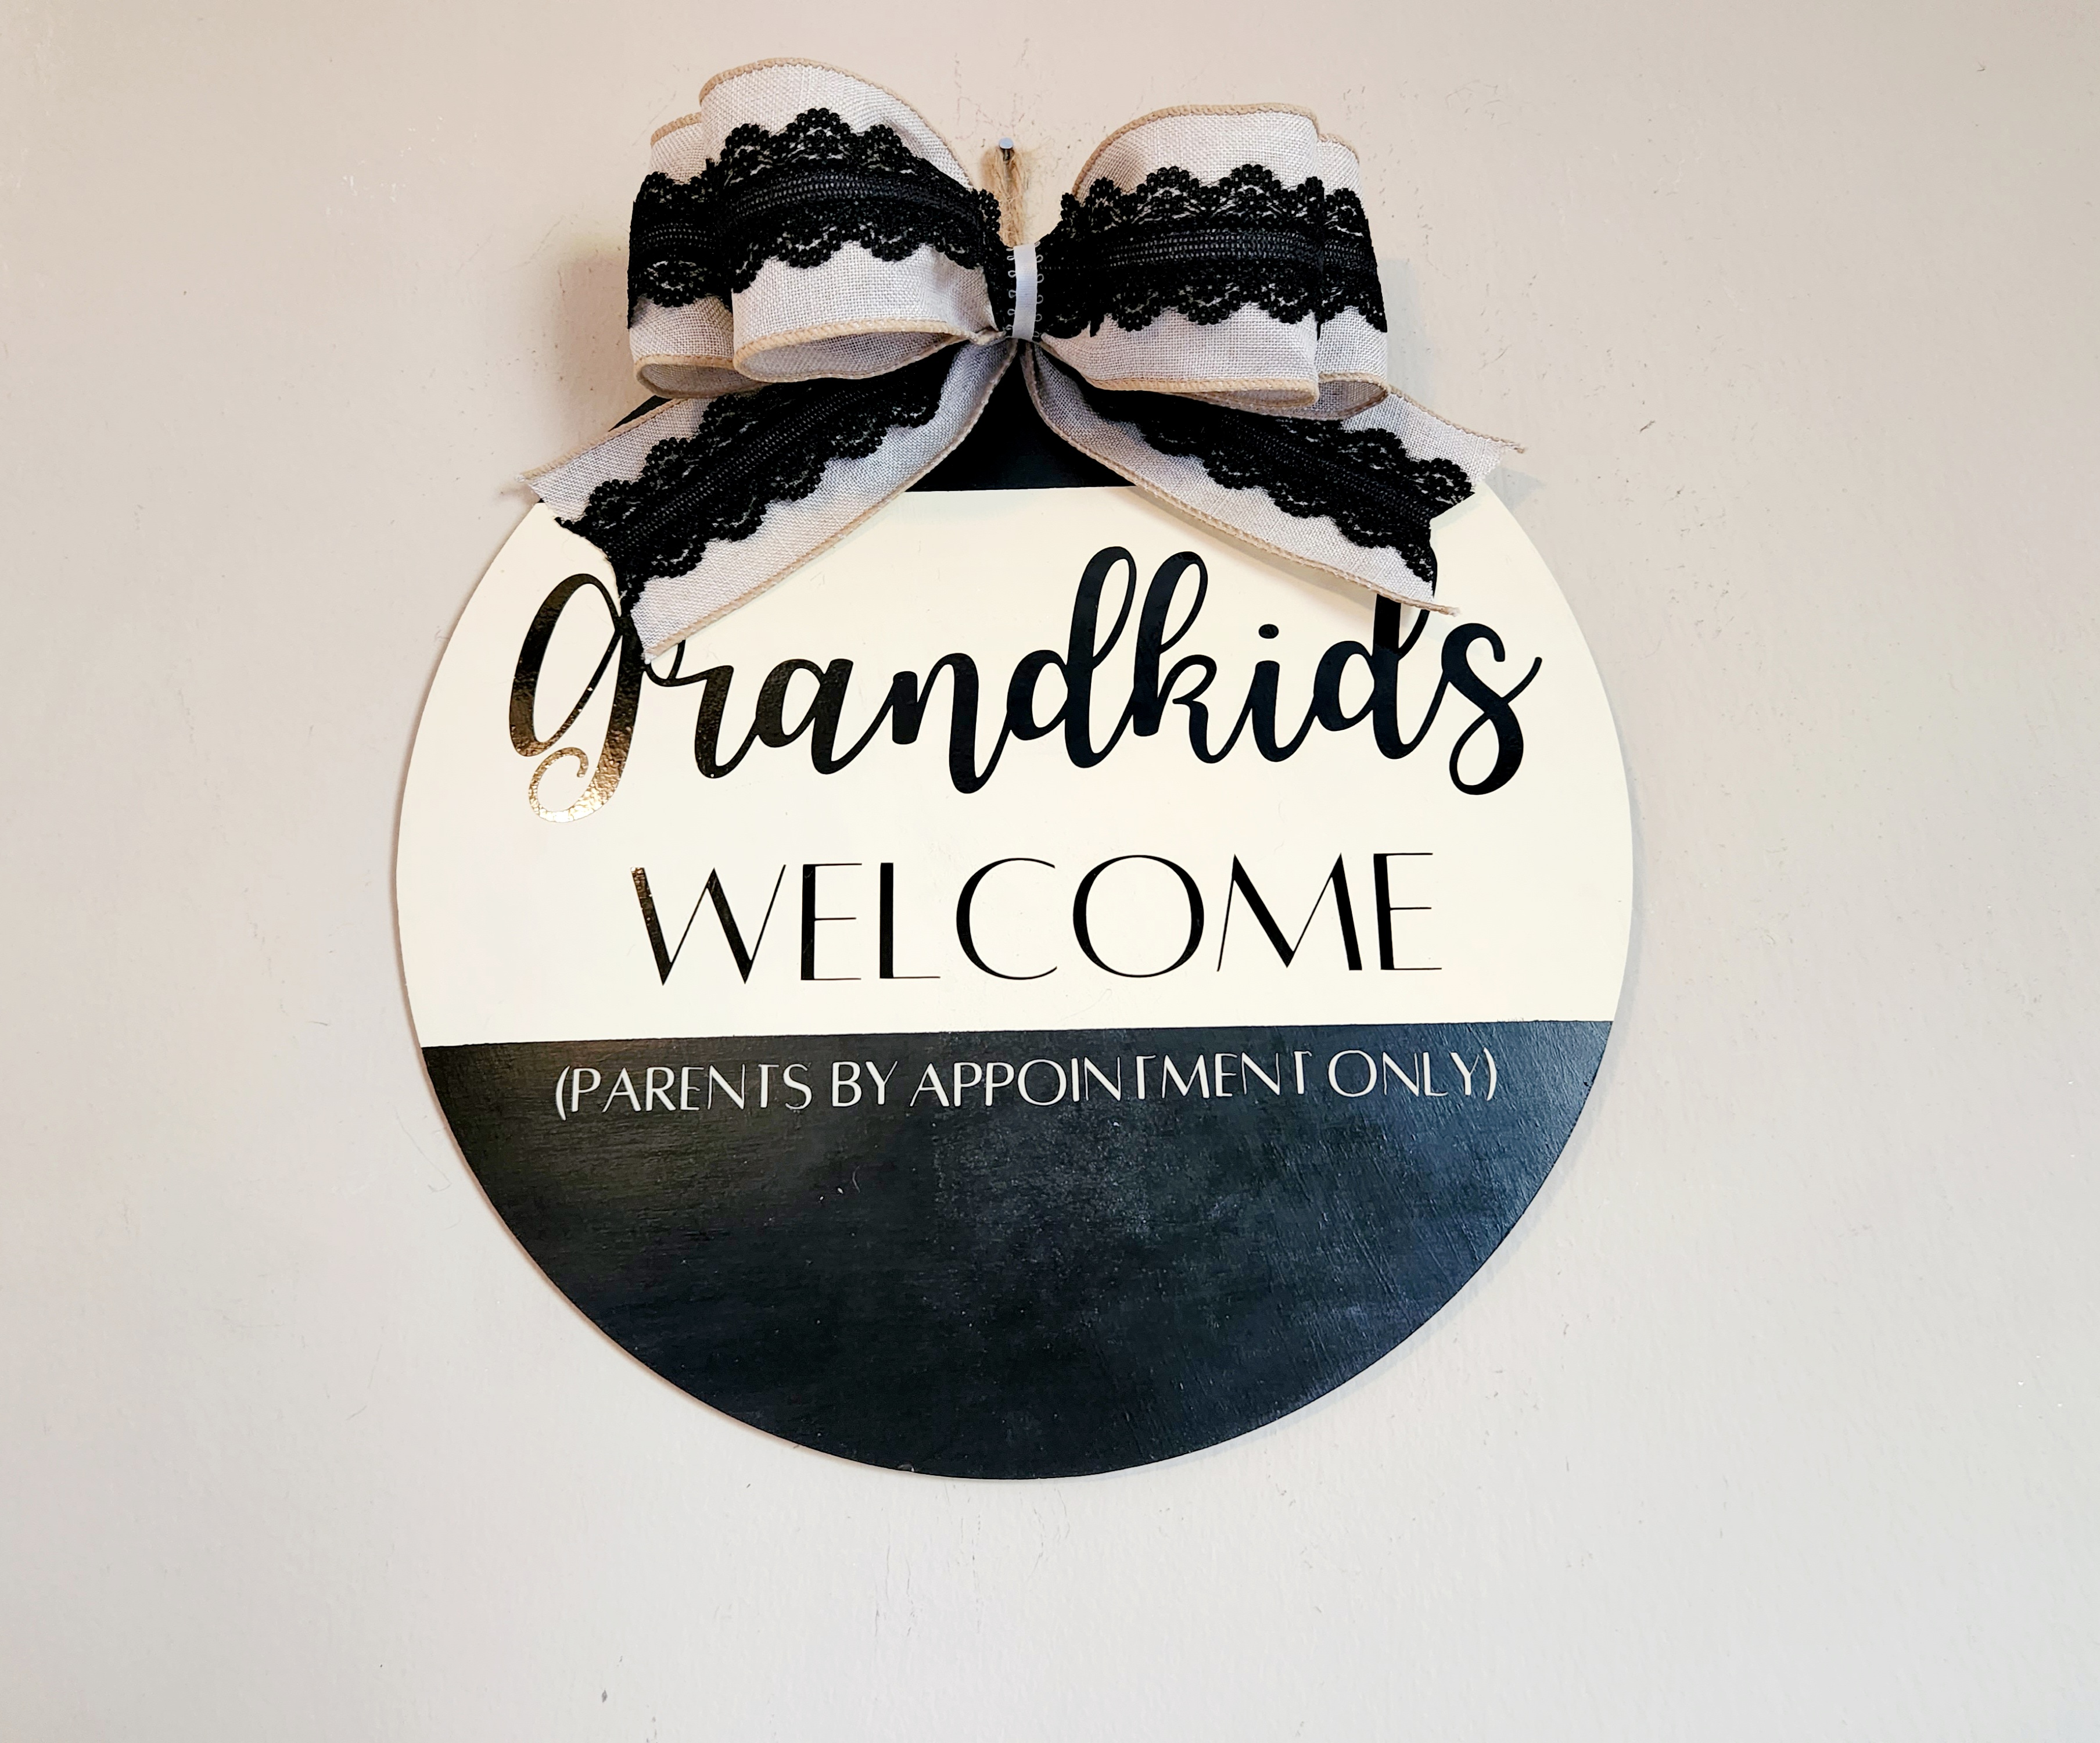 Khaki linen and black lace bow at the top of the Mother's Day gift round sign saying, "Grandkids welcome (parents by appointment only)"